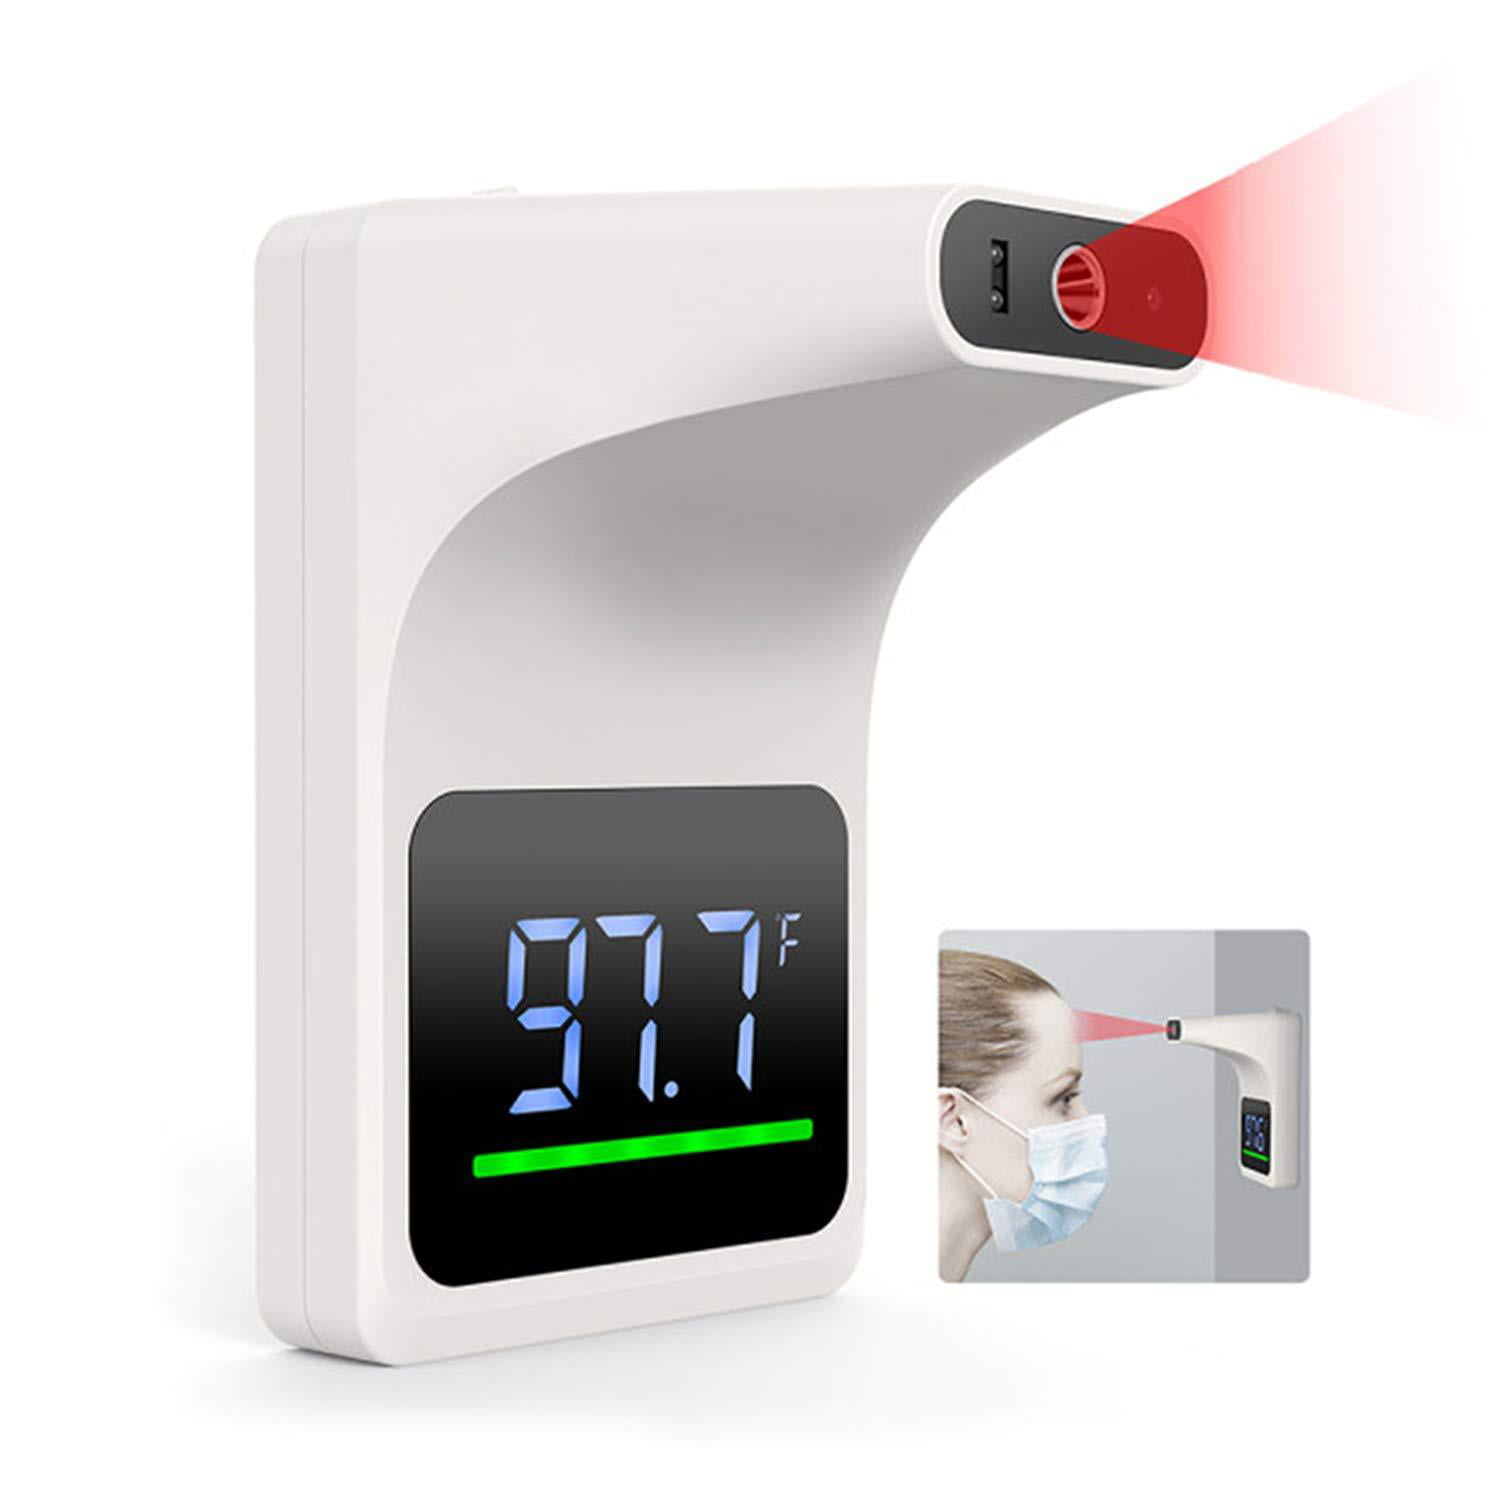 LTLJX Wall-Mounted Body Thermometer Non-Contact Rapid Temperature Measurement with Tricolor Fever Alarm LCD Display for Apartment Factories